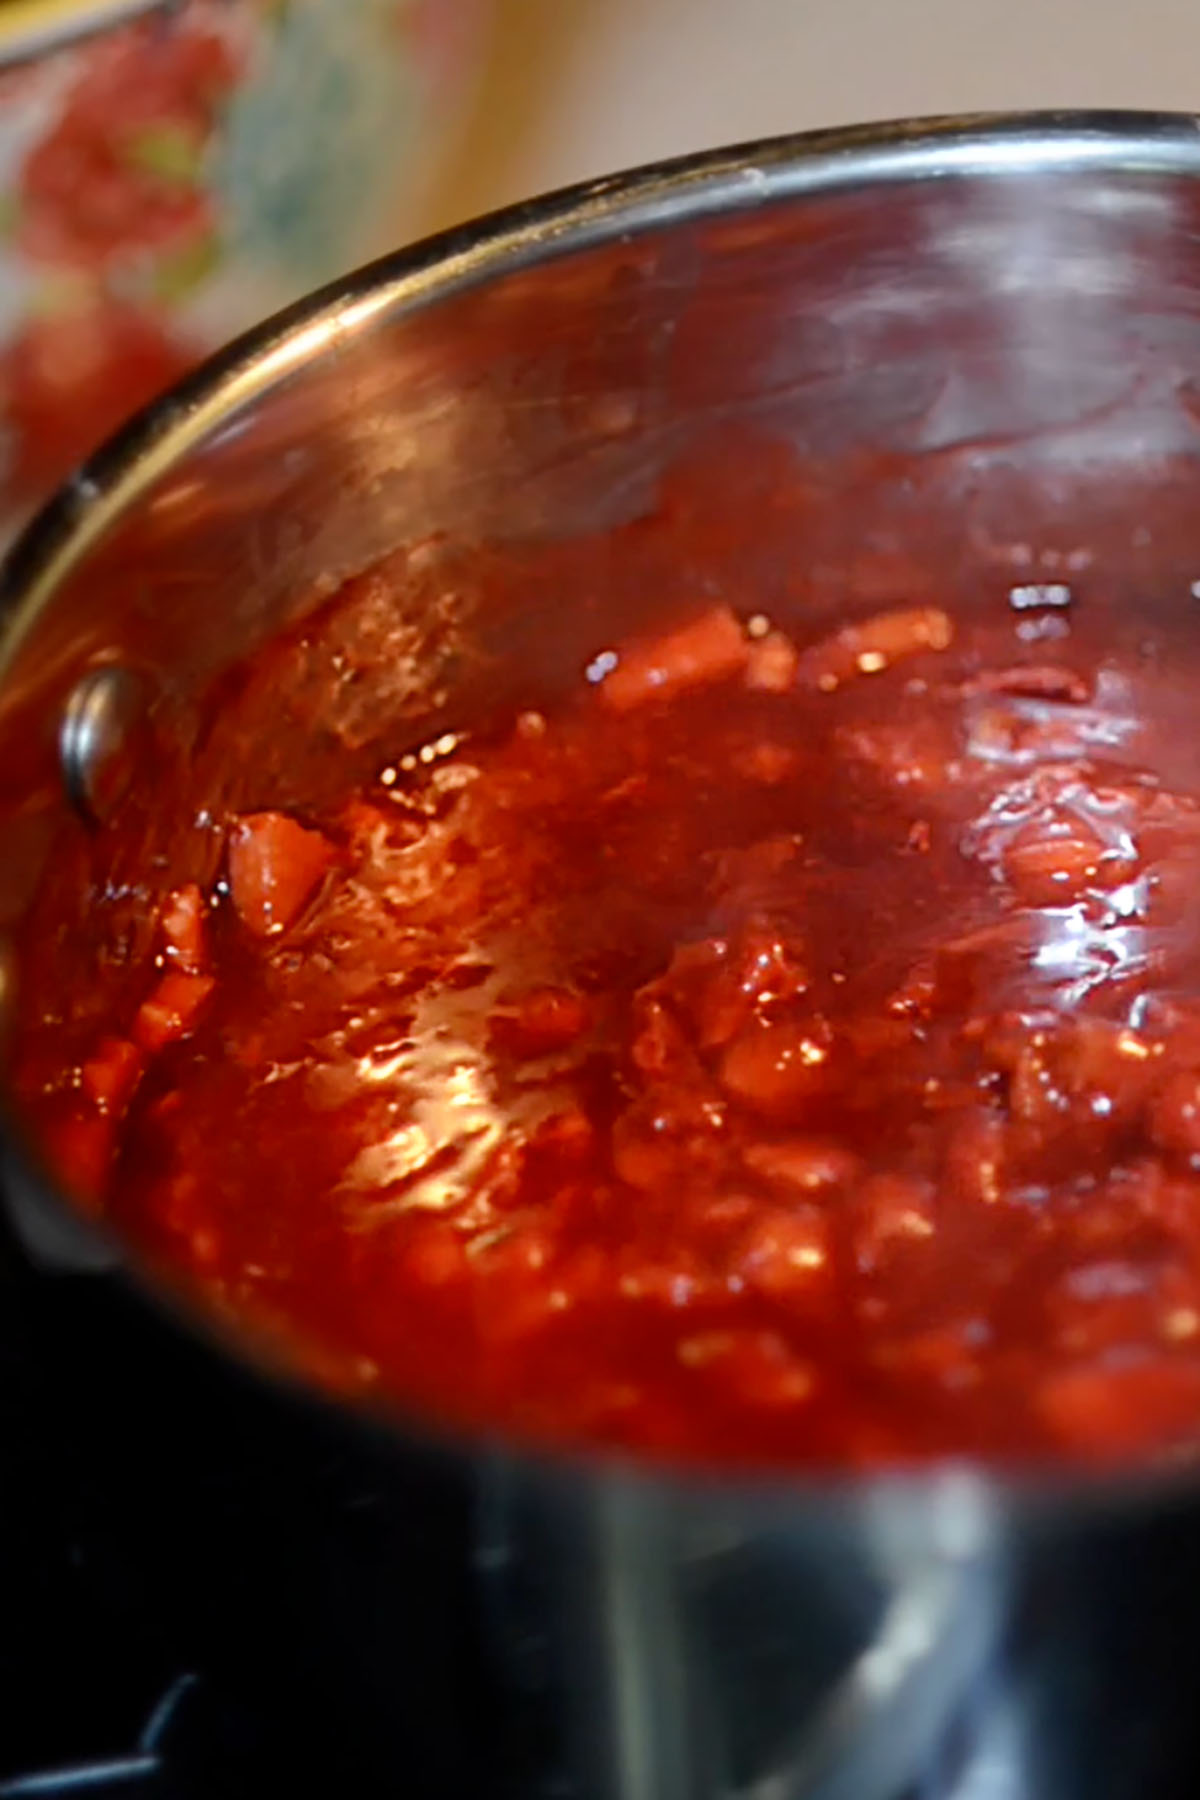 Strawberry Rhubarb jam simmering in a pot.